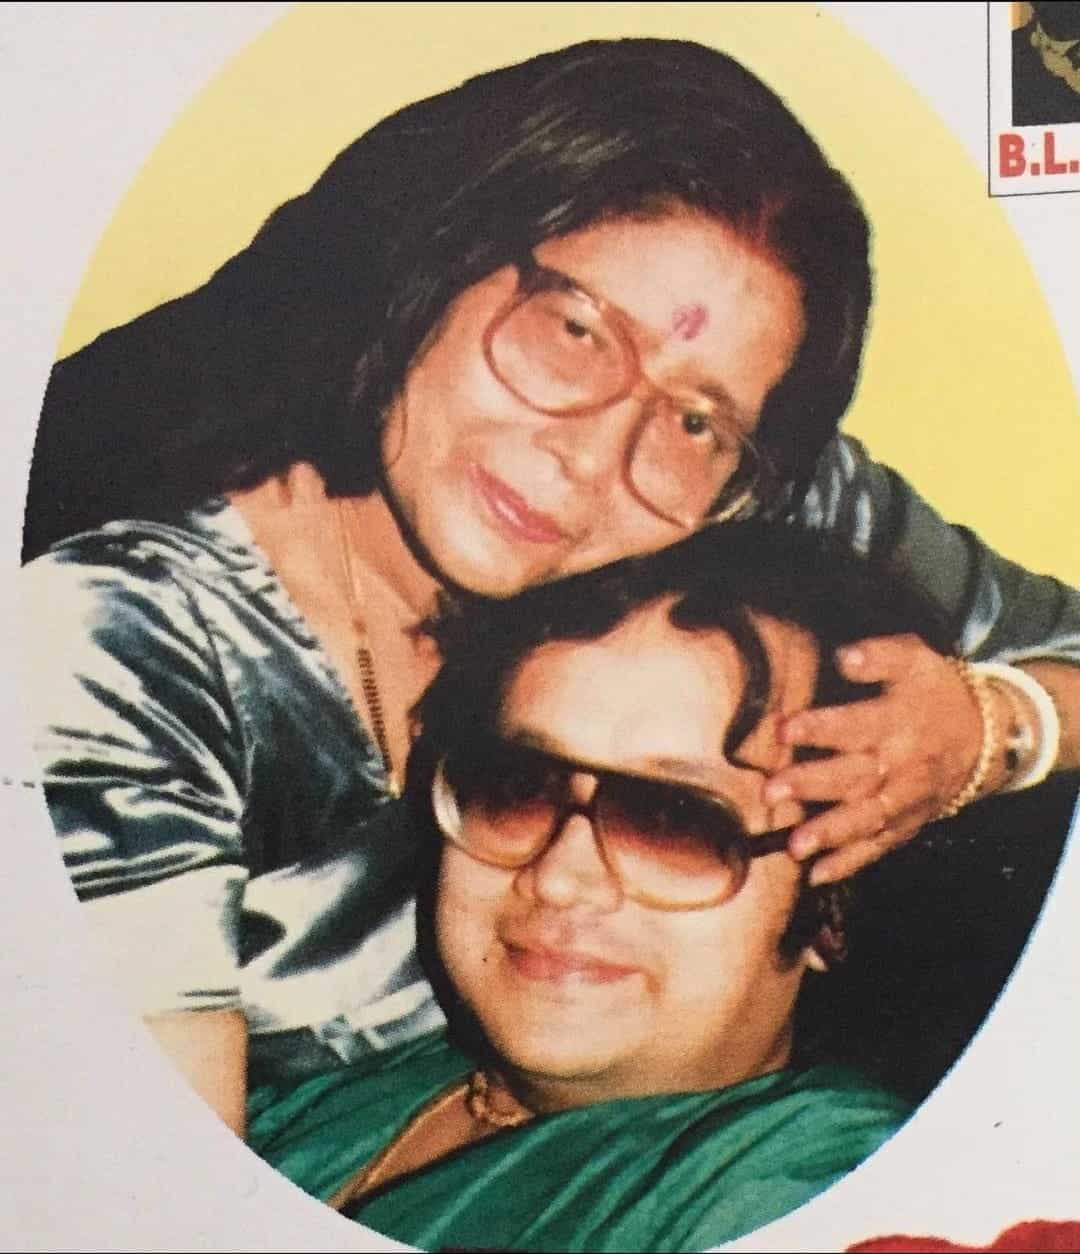 Bappi with his mother, Bansuri